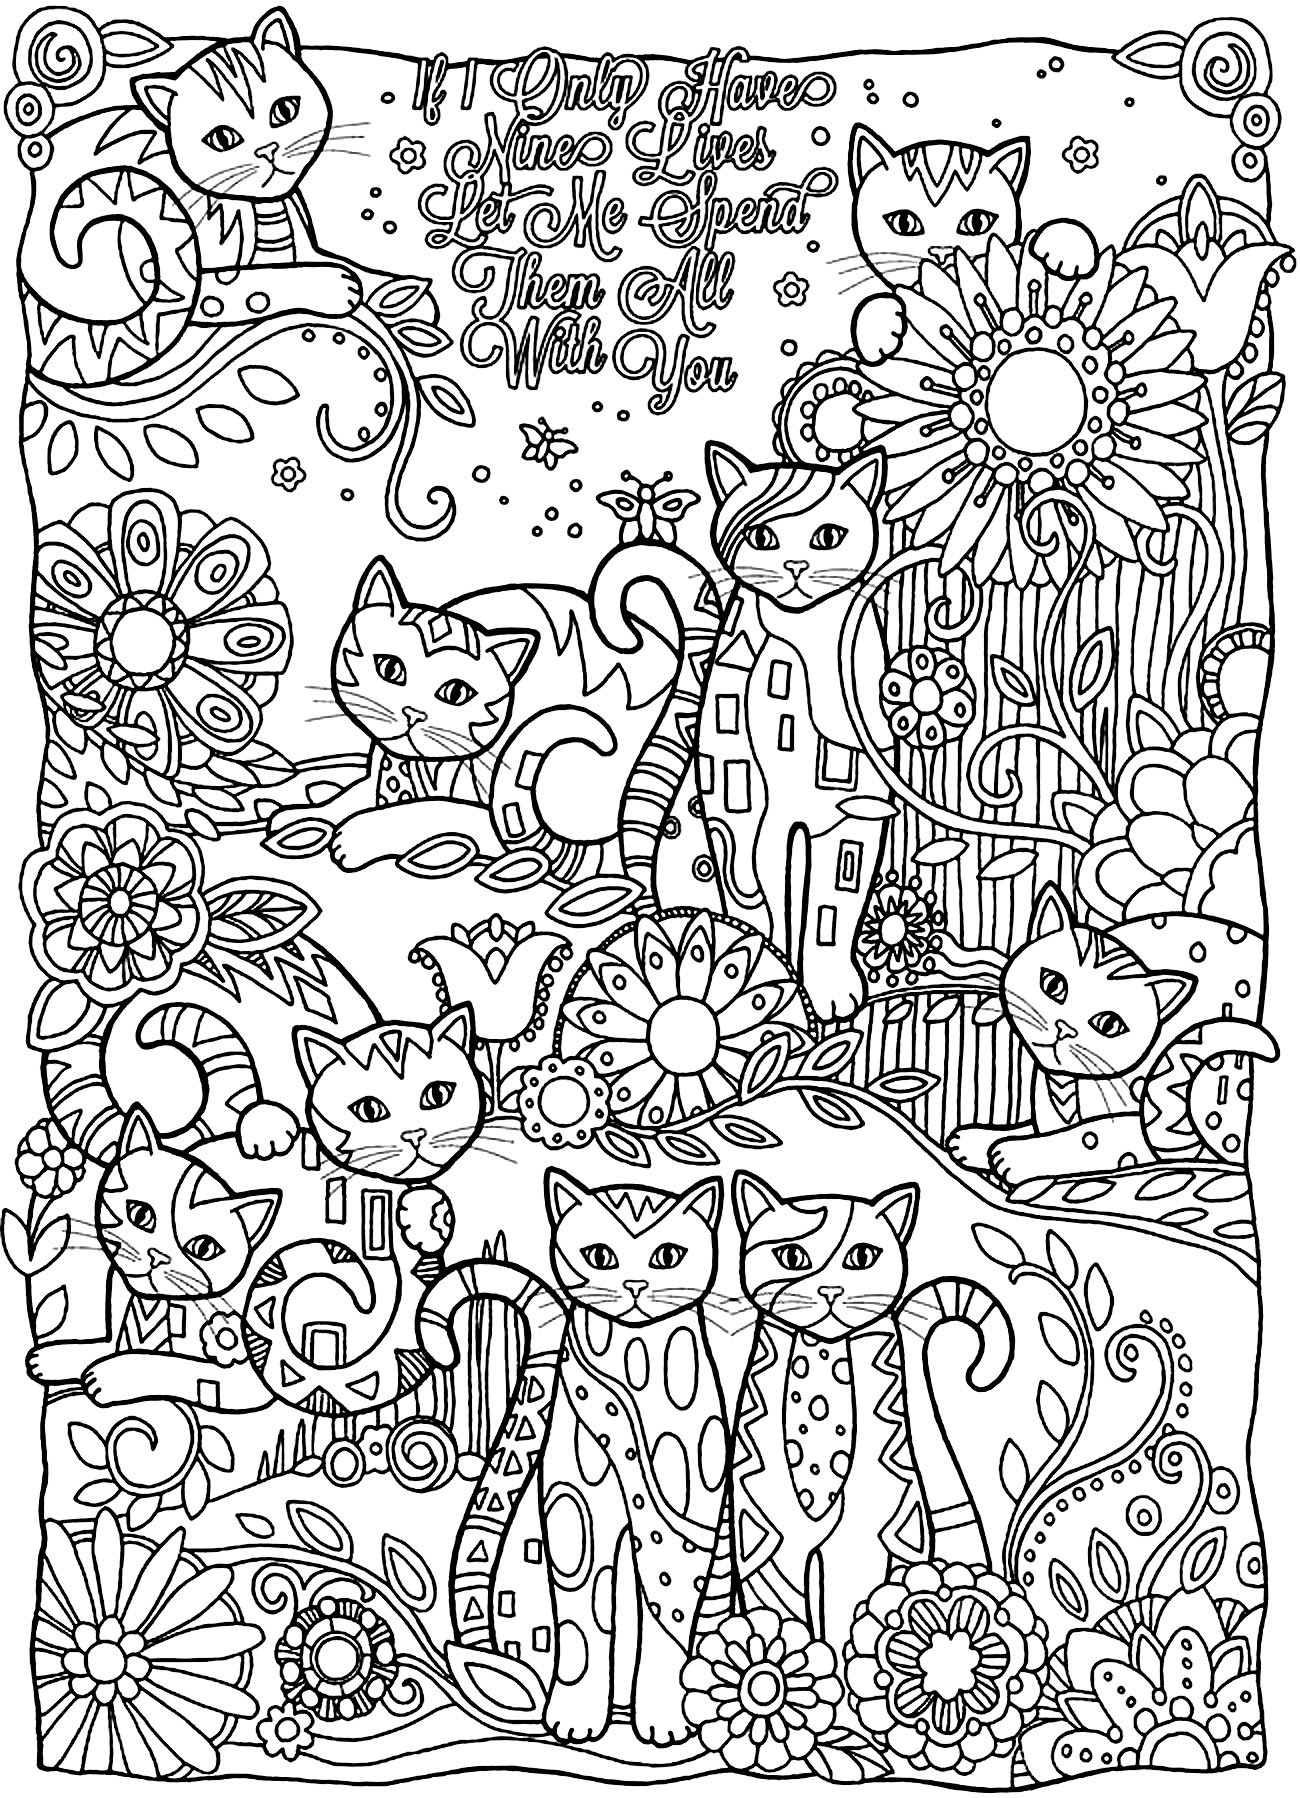 Cat Coloring Pages for Adults Wallpaper